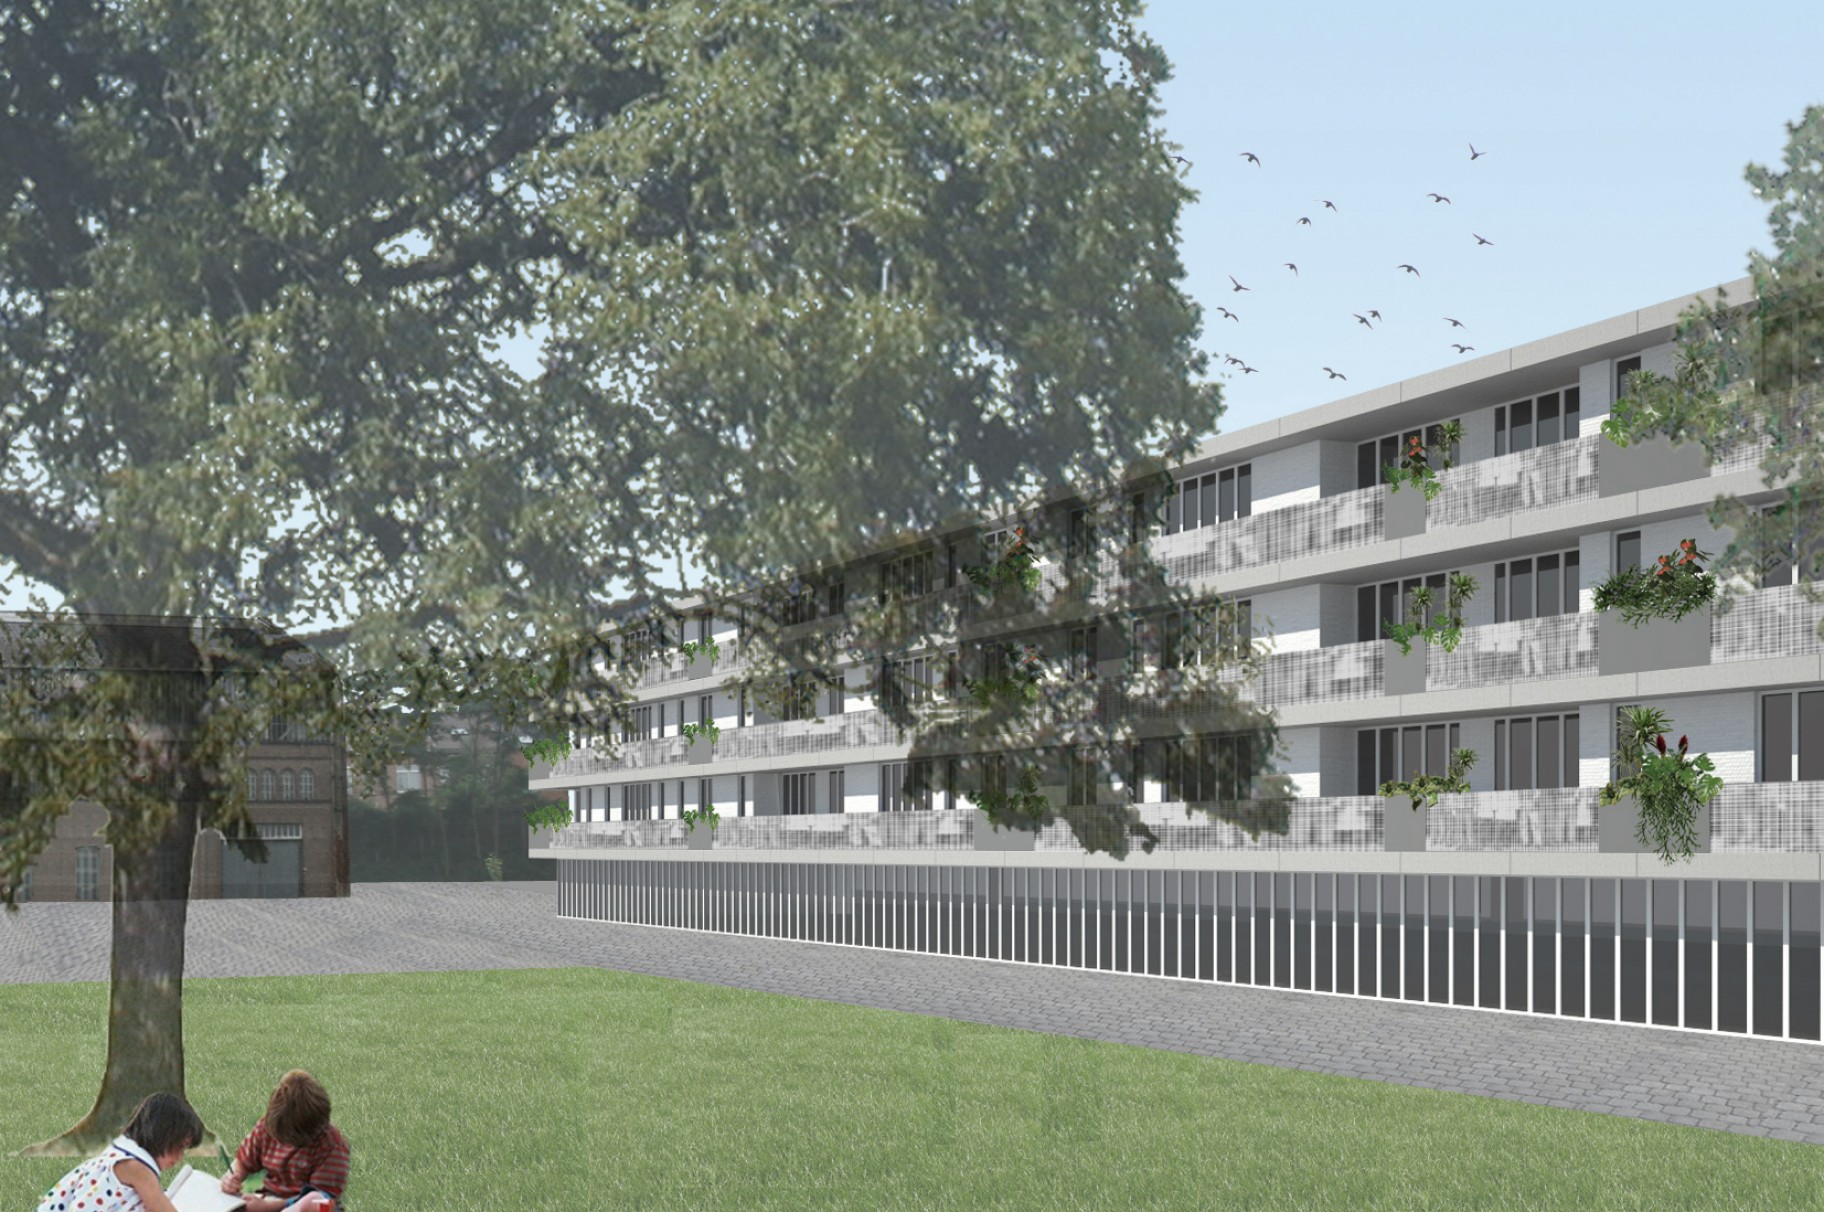 Competition Centrale Werkplaatsen submitted